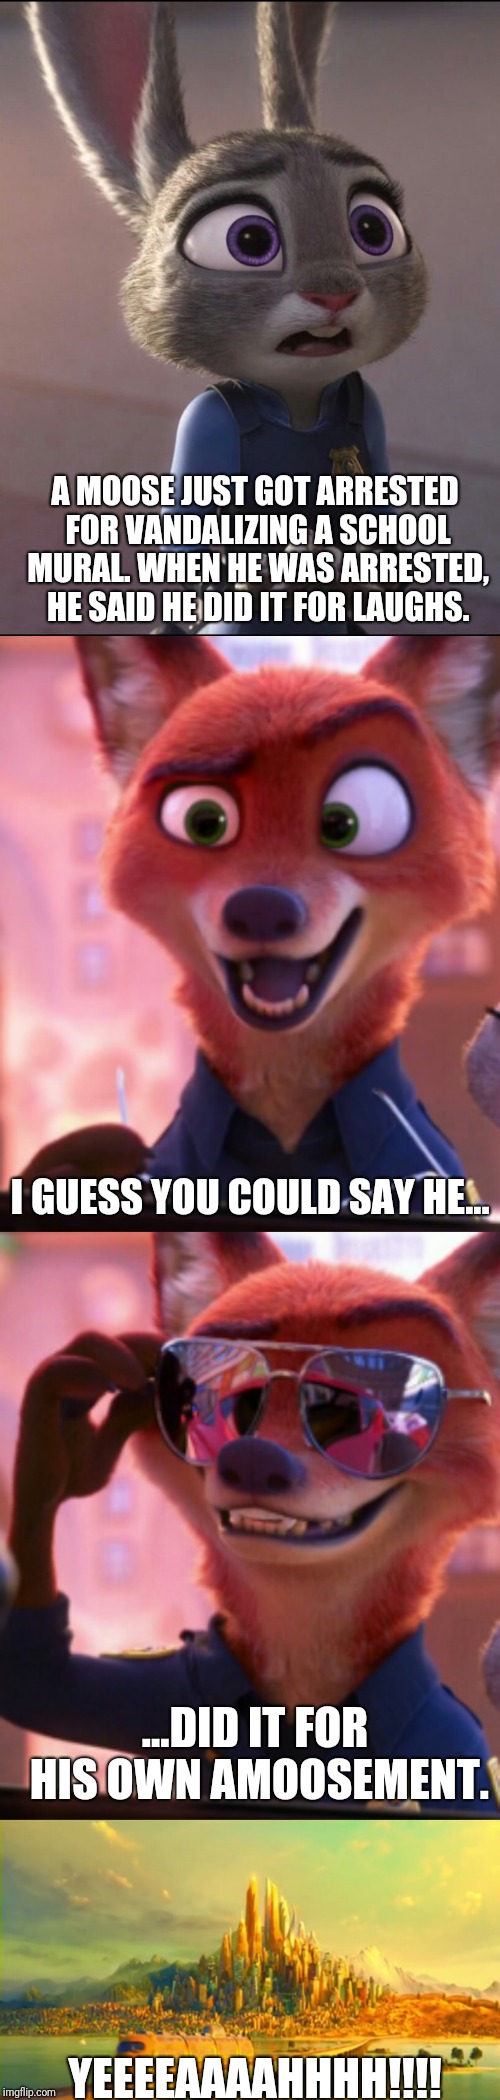 CSI: Zootopia 12 | A MOOSE JUST GOT ARRESTED FOR VANDALIZING A SCHOOL MURAL. WHEN HE WAS ARRESTED, HE SAID HE DID IT FOR LAUGHS. I GUESS YOU COULD SAY HE... ...DID IT FOR HIS OWN AMOOSEMENT. YEEEEAAAAHHHH!!!! | image tagged in zootopia,judy hopps,nick wilde,parody,funny,memes | made w/ Imgflip meme maker